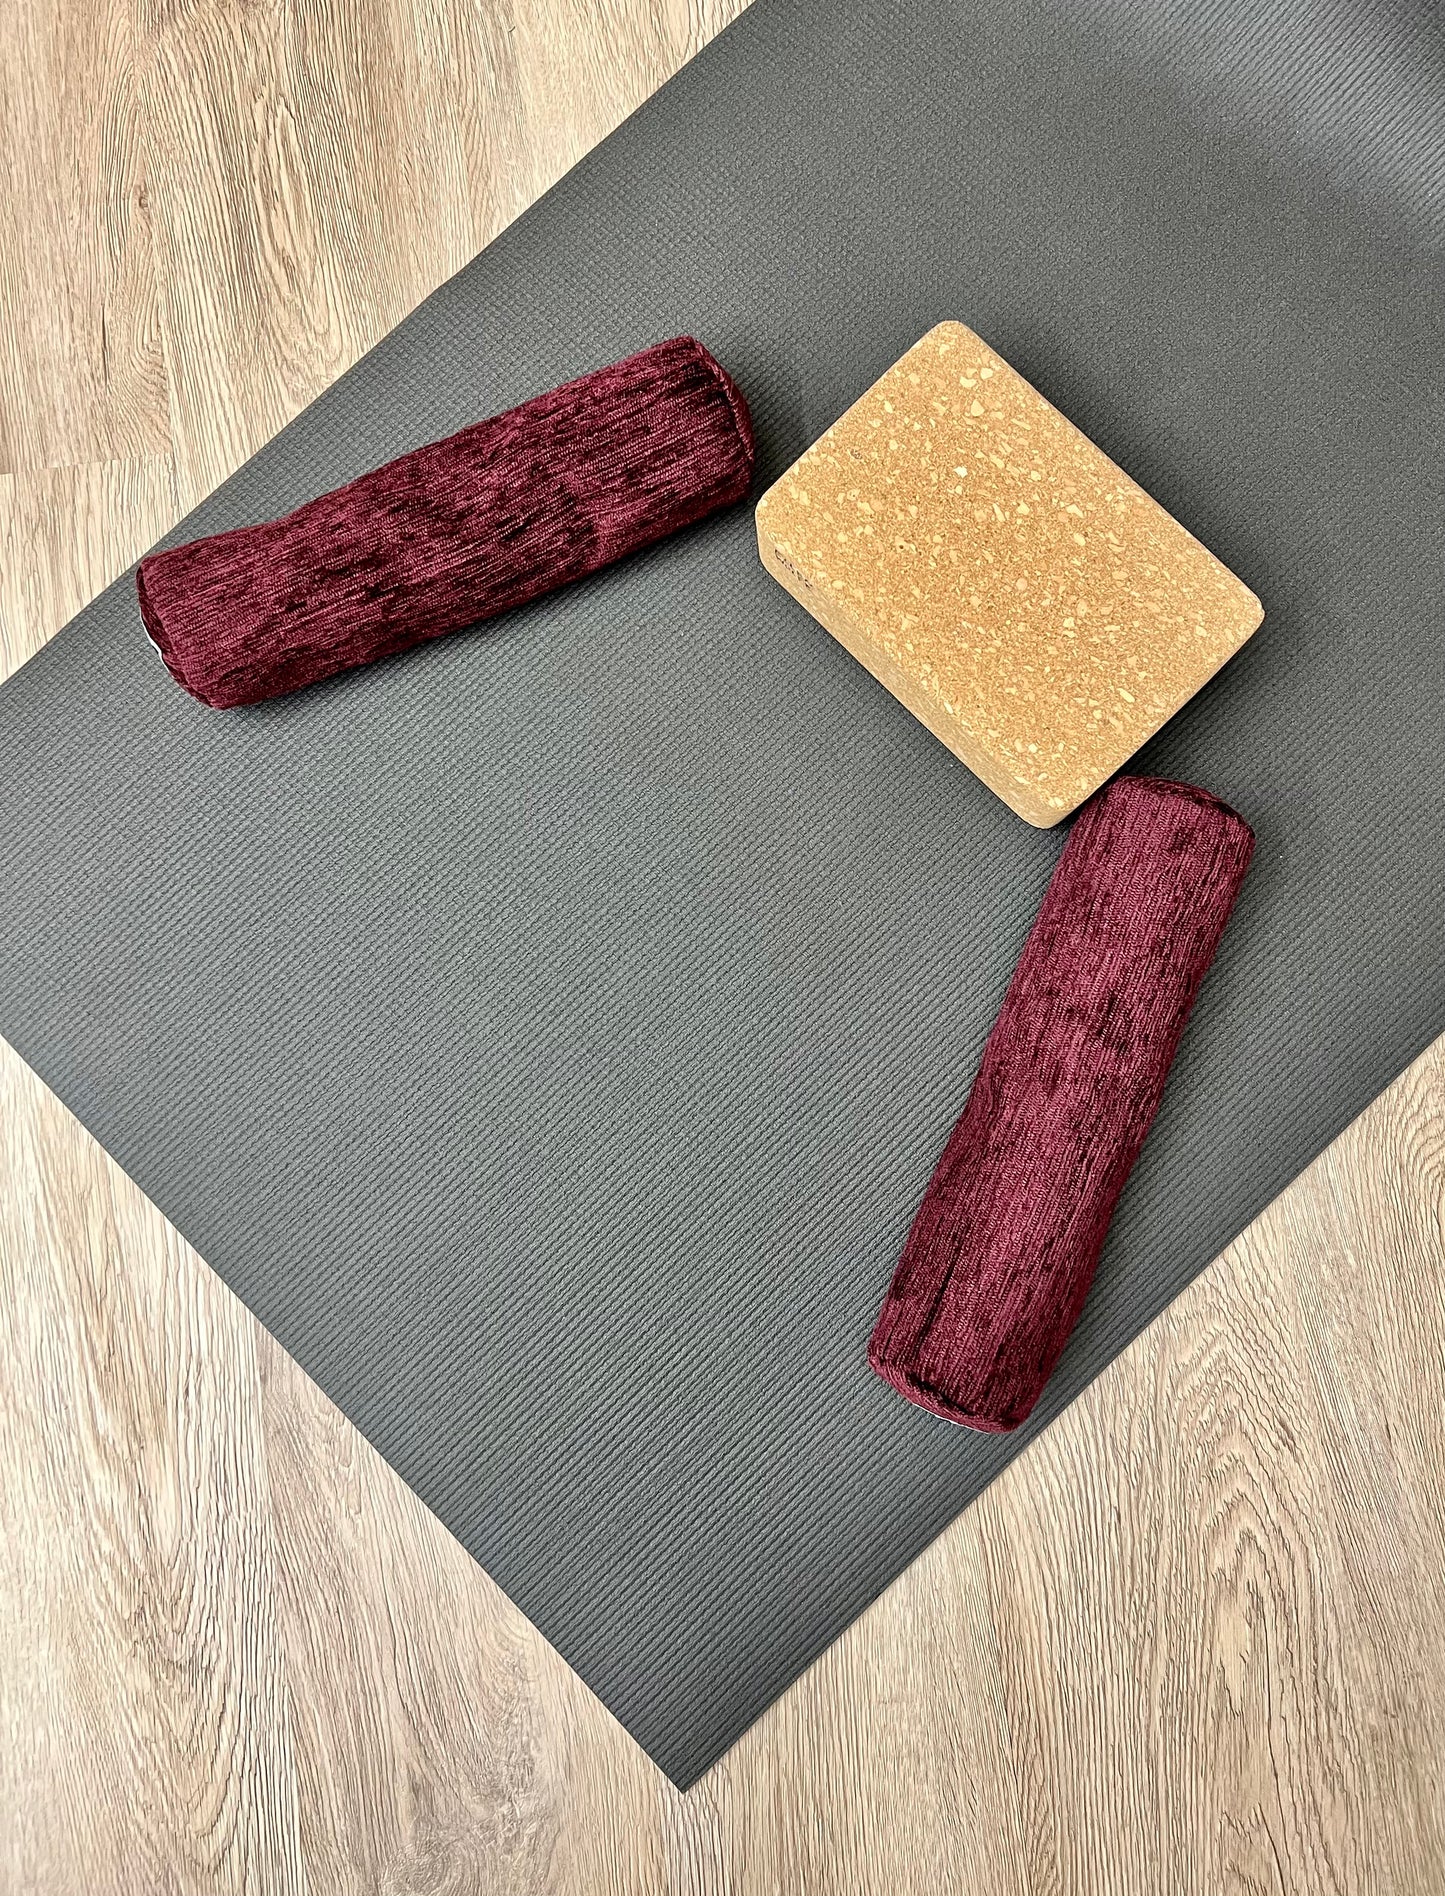 Mini yoga bolster in durable fabric, dark solid purple plush fabric. Cushion and support the body in the practice of yoga and meditation.Removeable cover. Made in Canada by My Yoga Room Elements